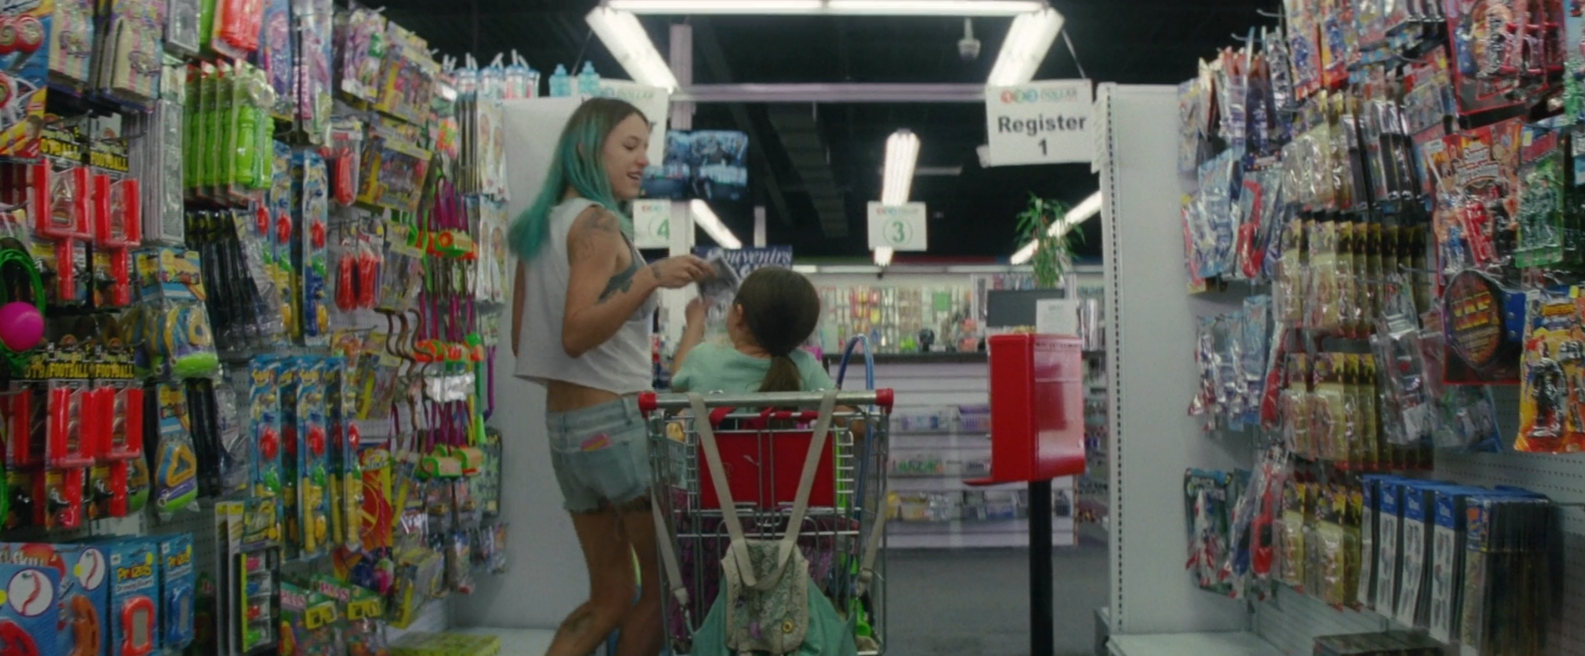 The Florida Project Movie Review